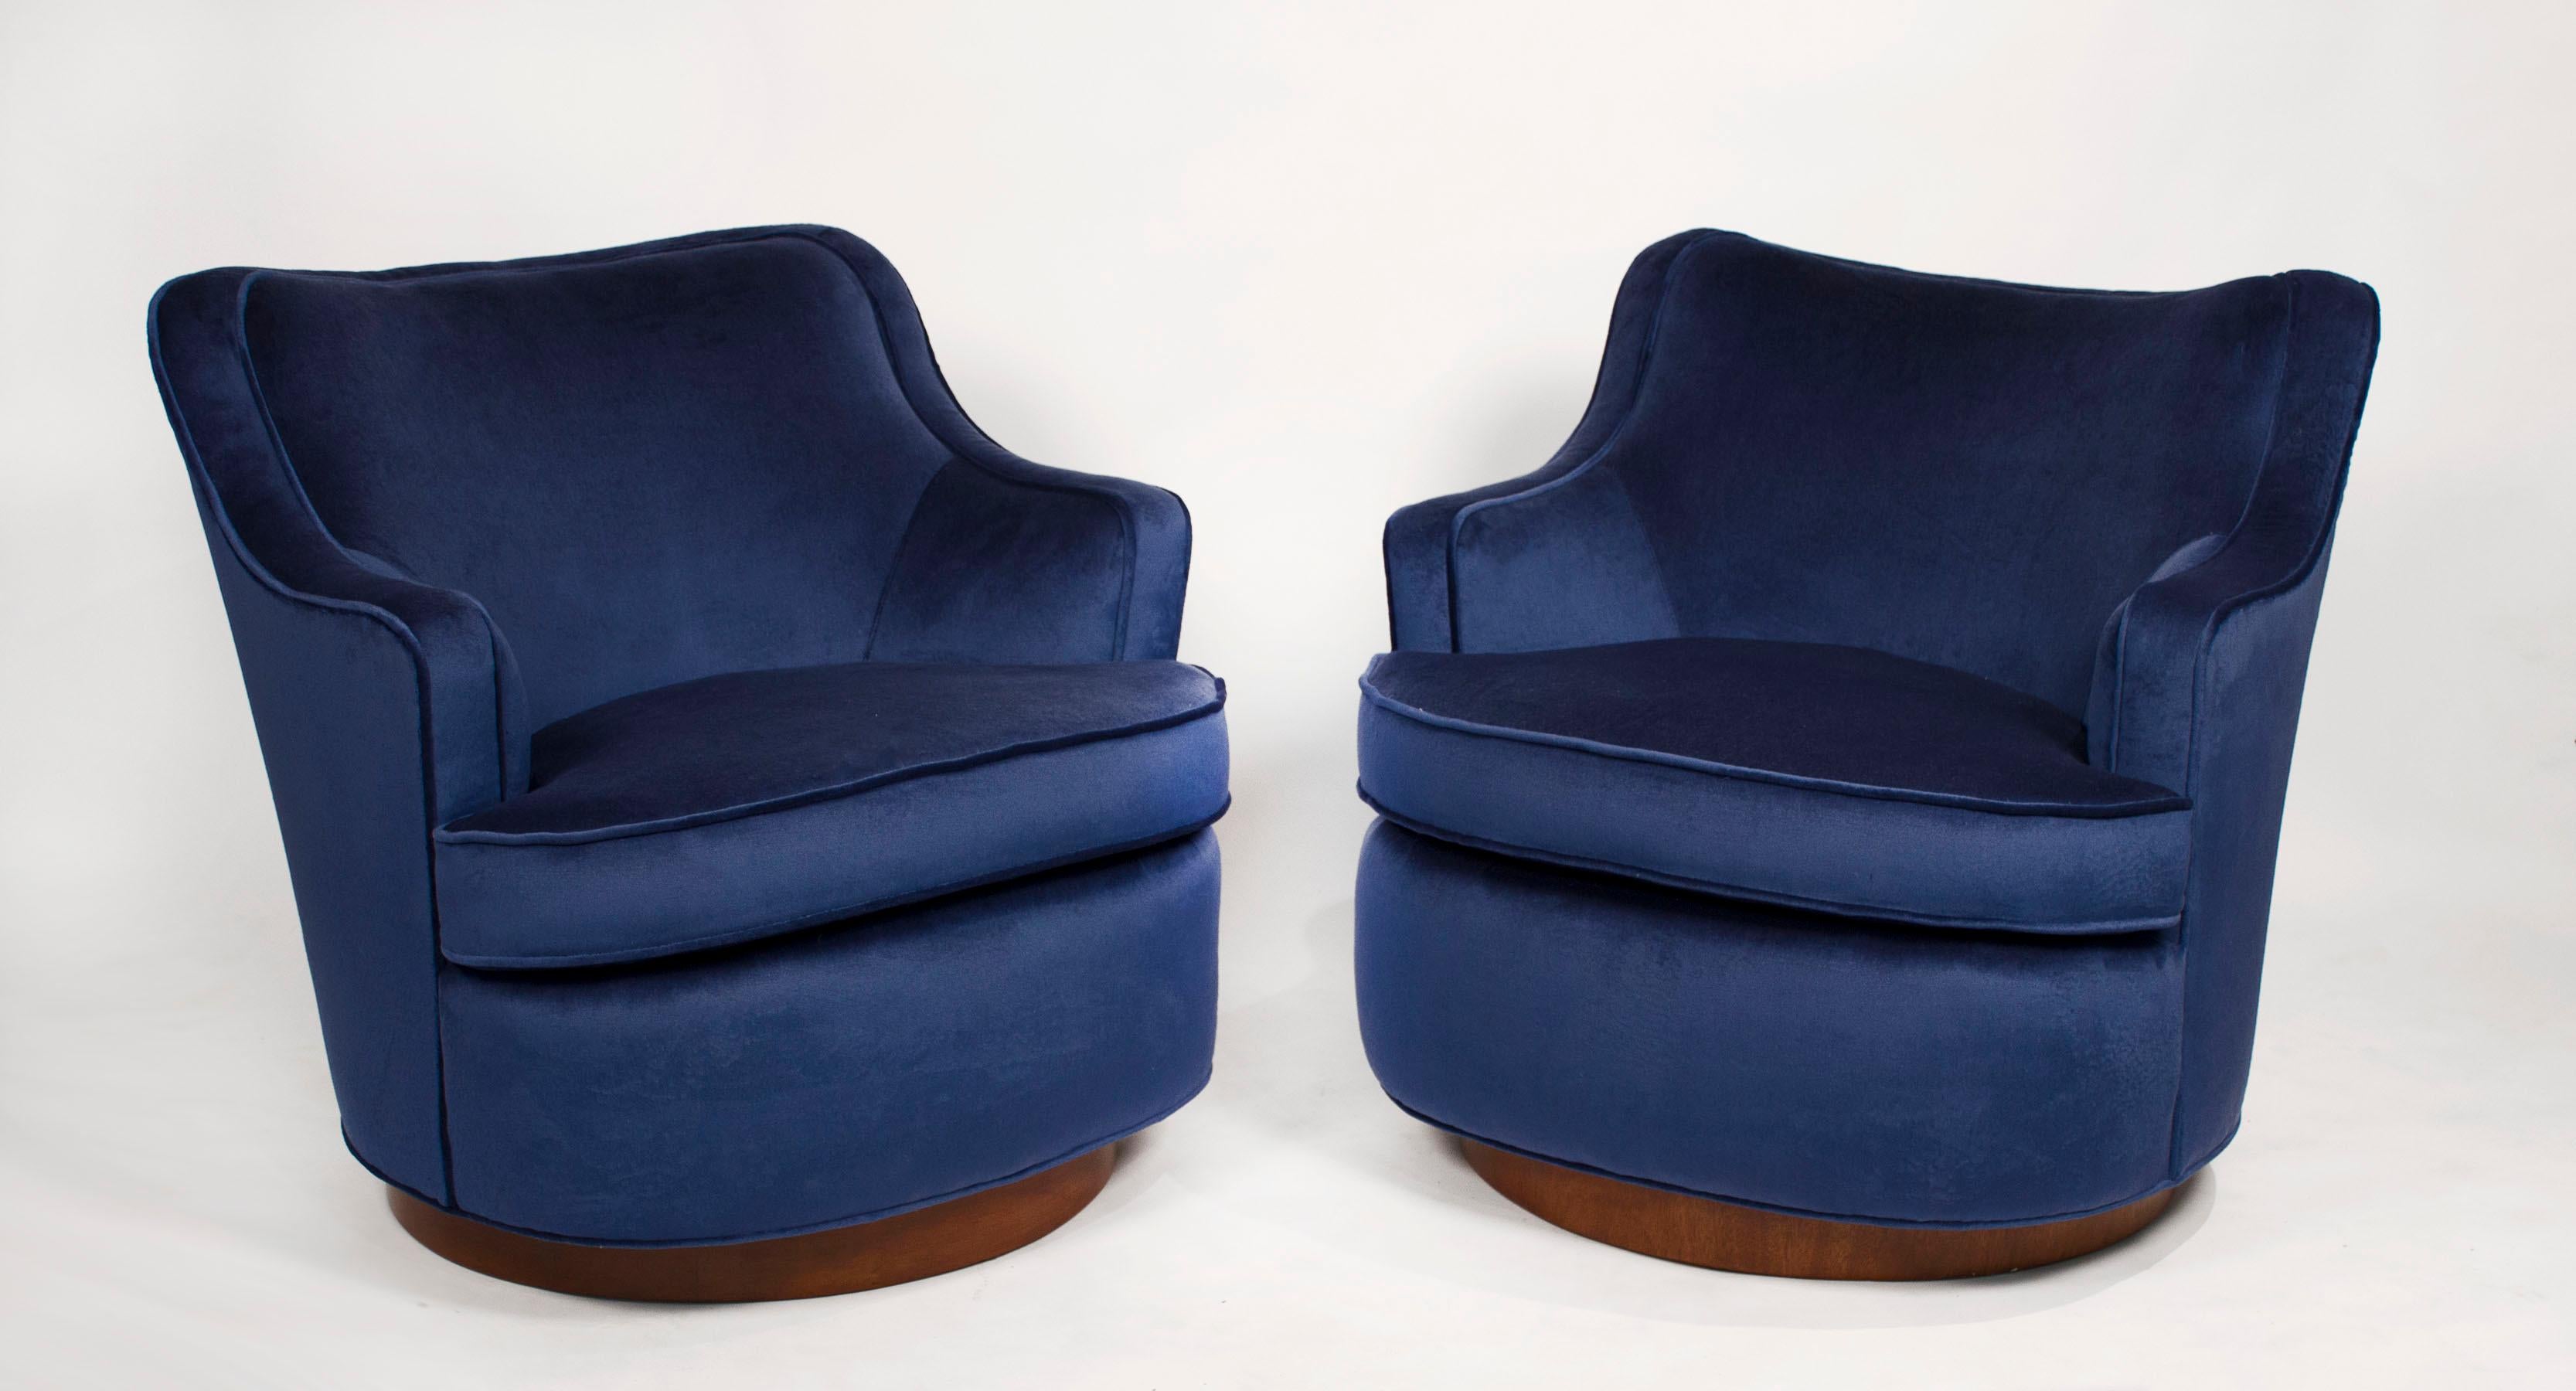 Early pair of Dunbar swivel chairs fully restored in high grade blue velvet. New foam and hand tied springs. These are extremely comfortable even for a tall person and are very high-quality construction with solid hardwood frames.